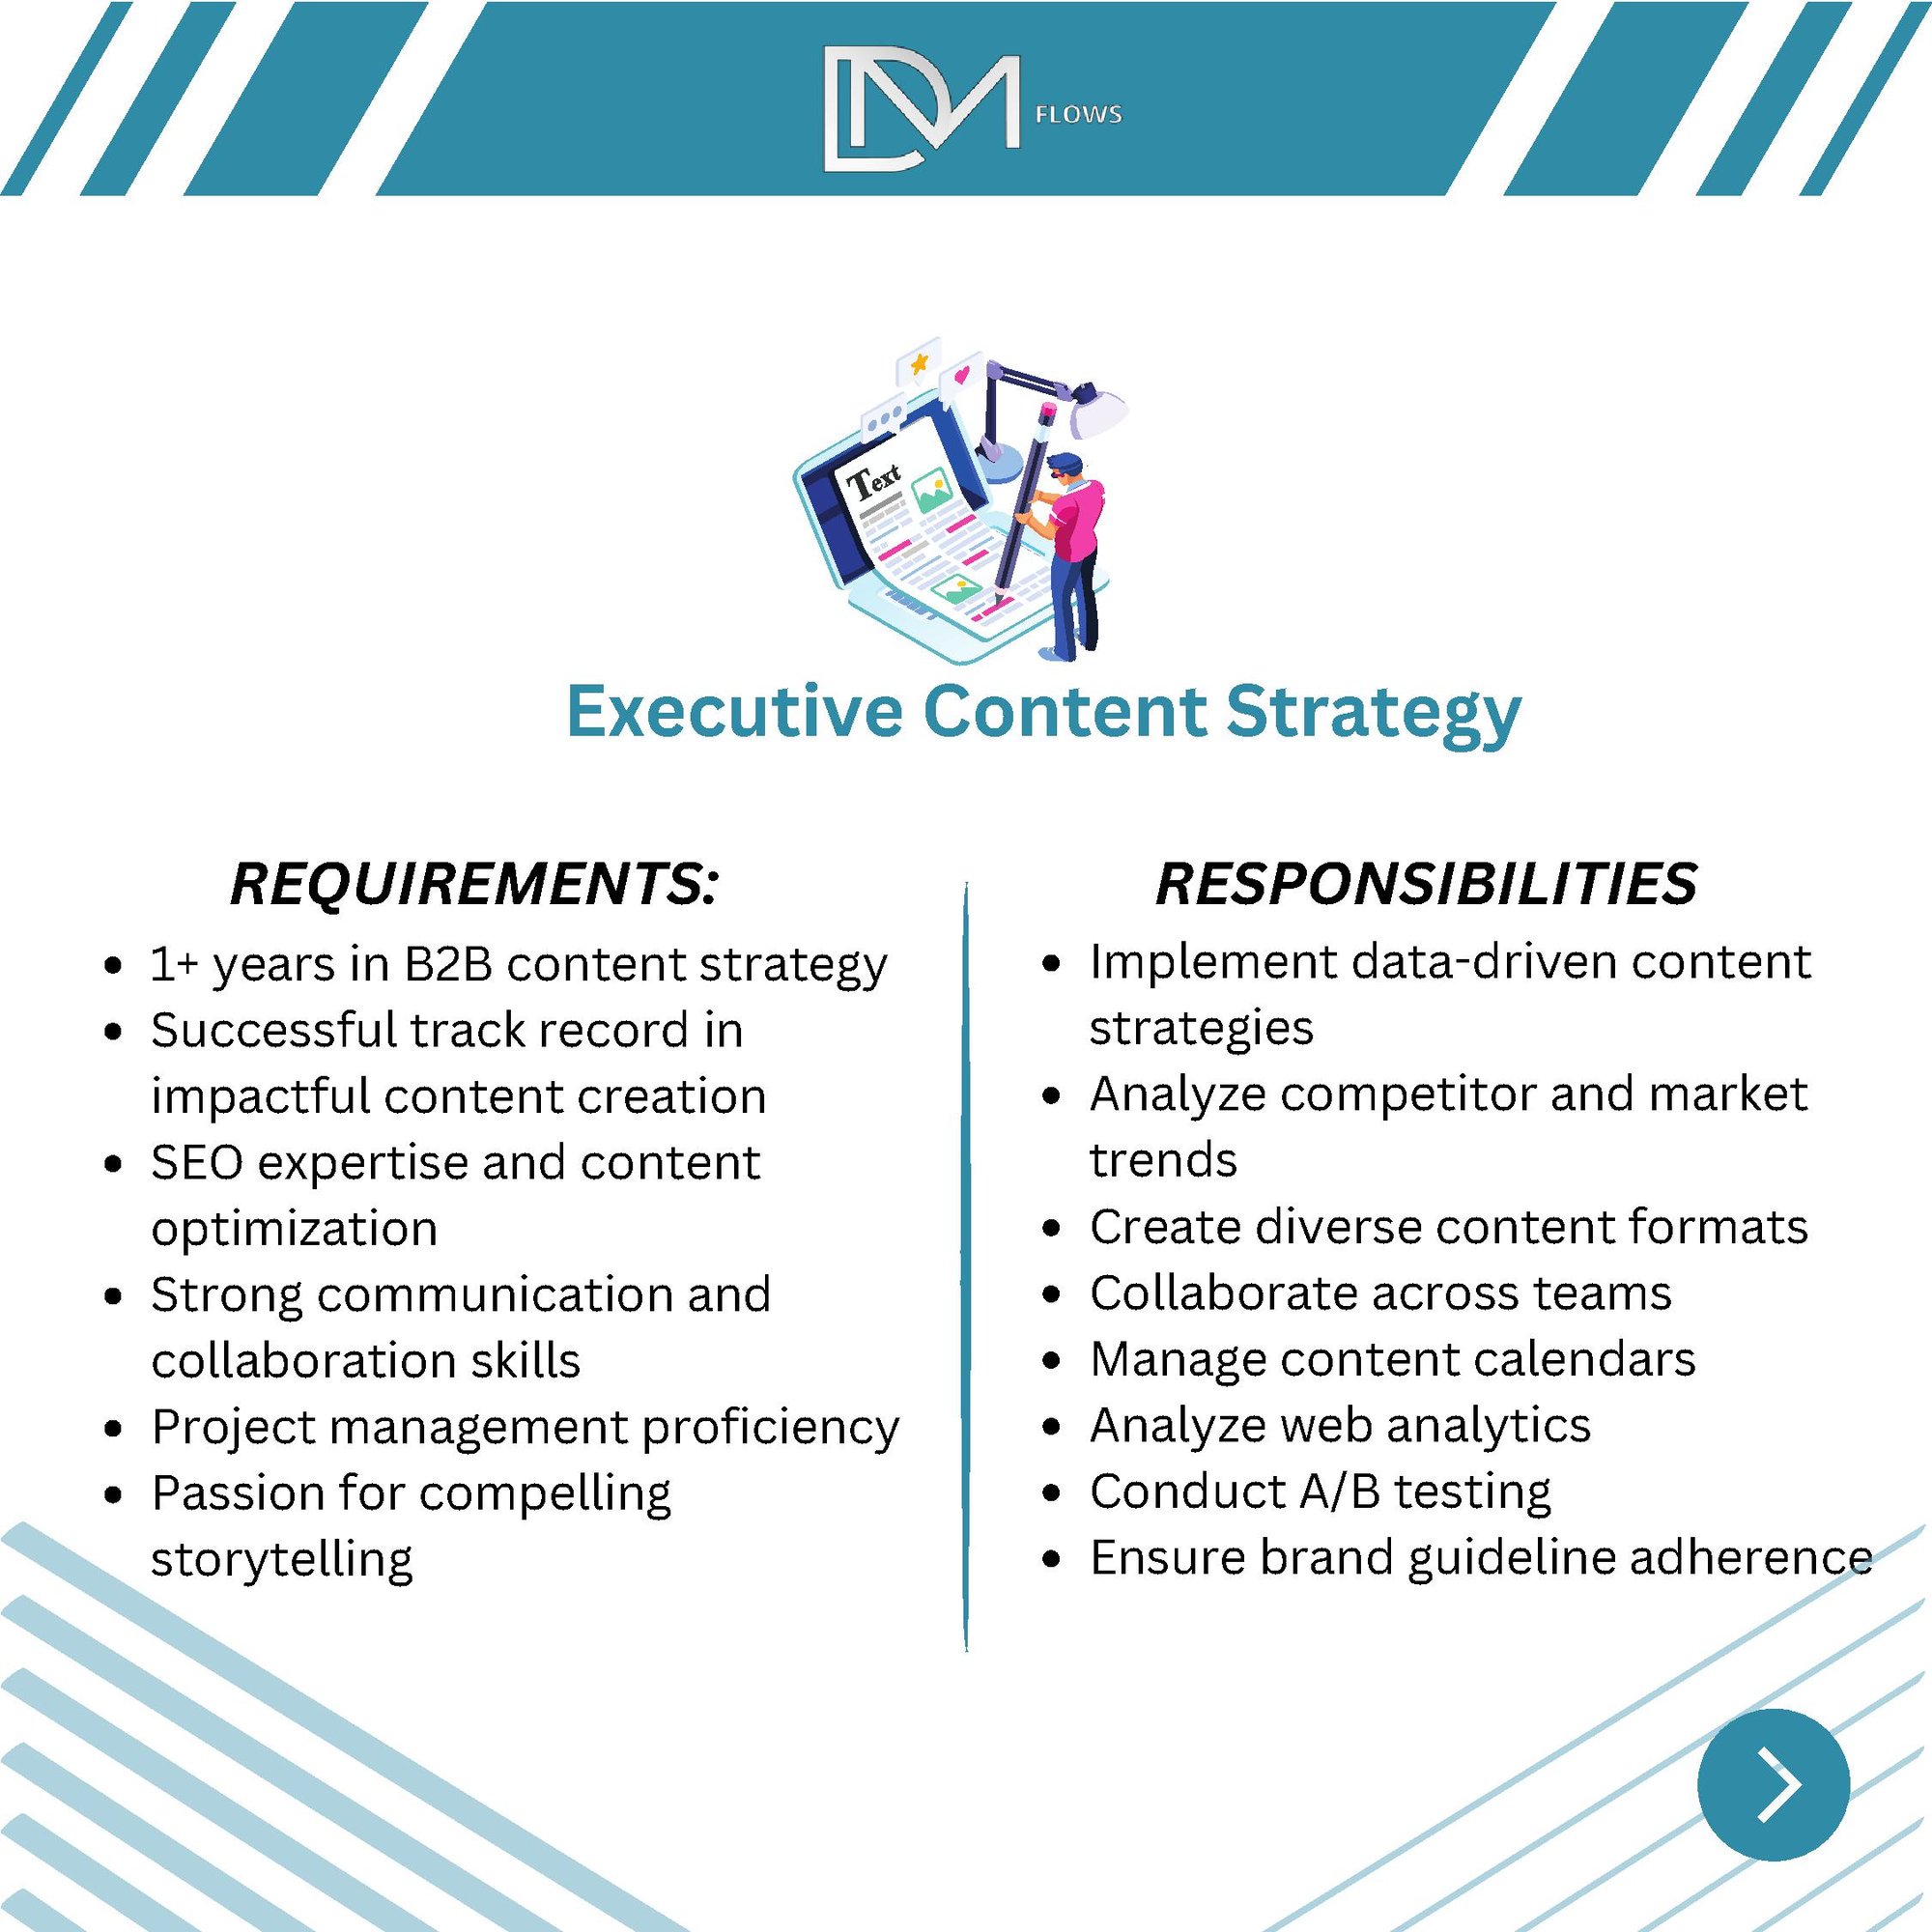 Executive Content Strategy